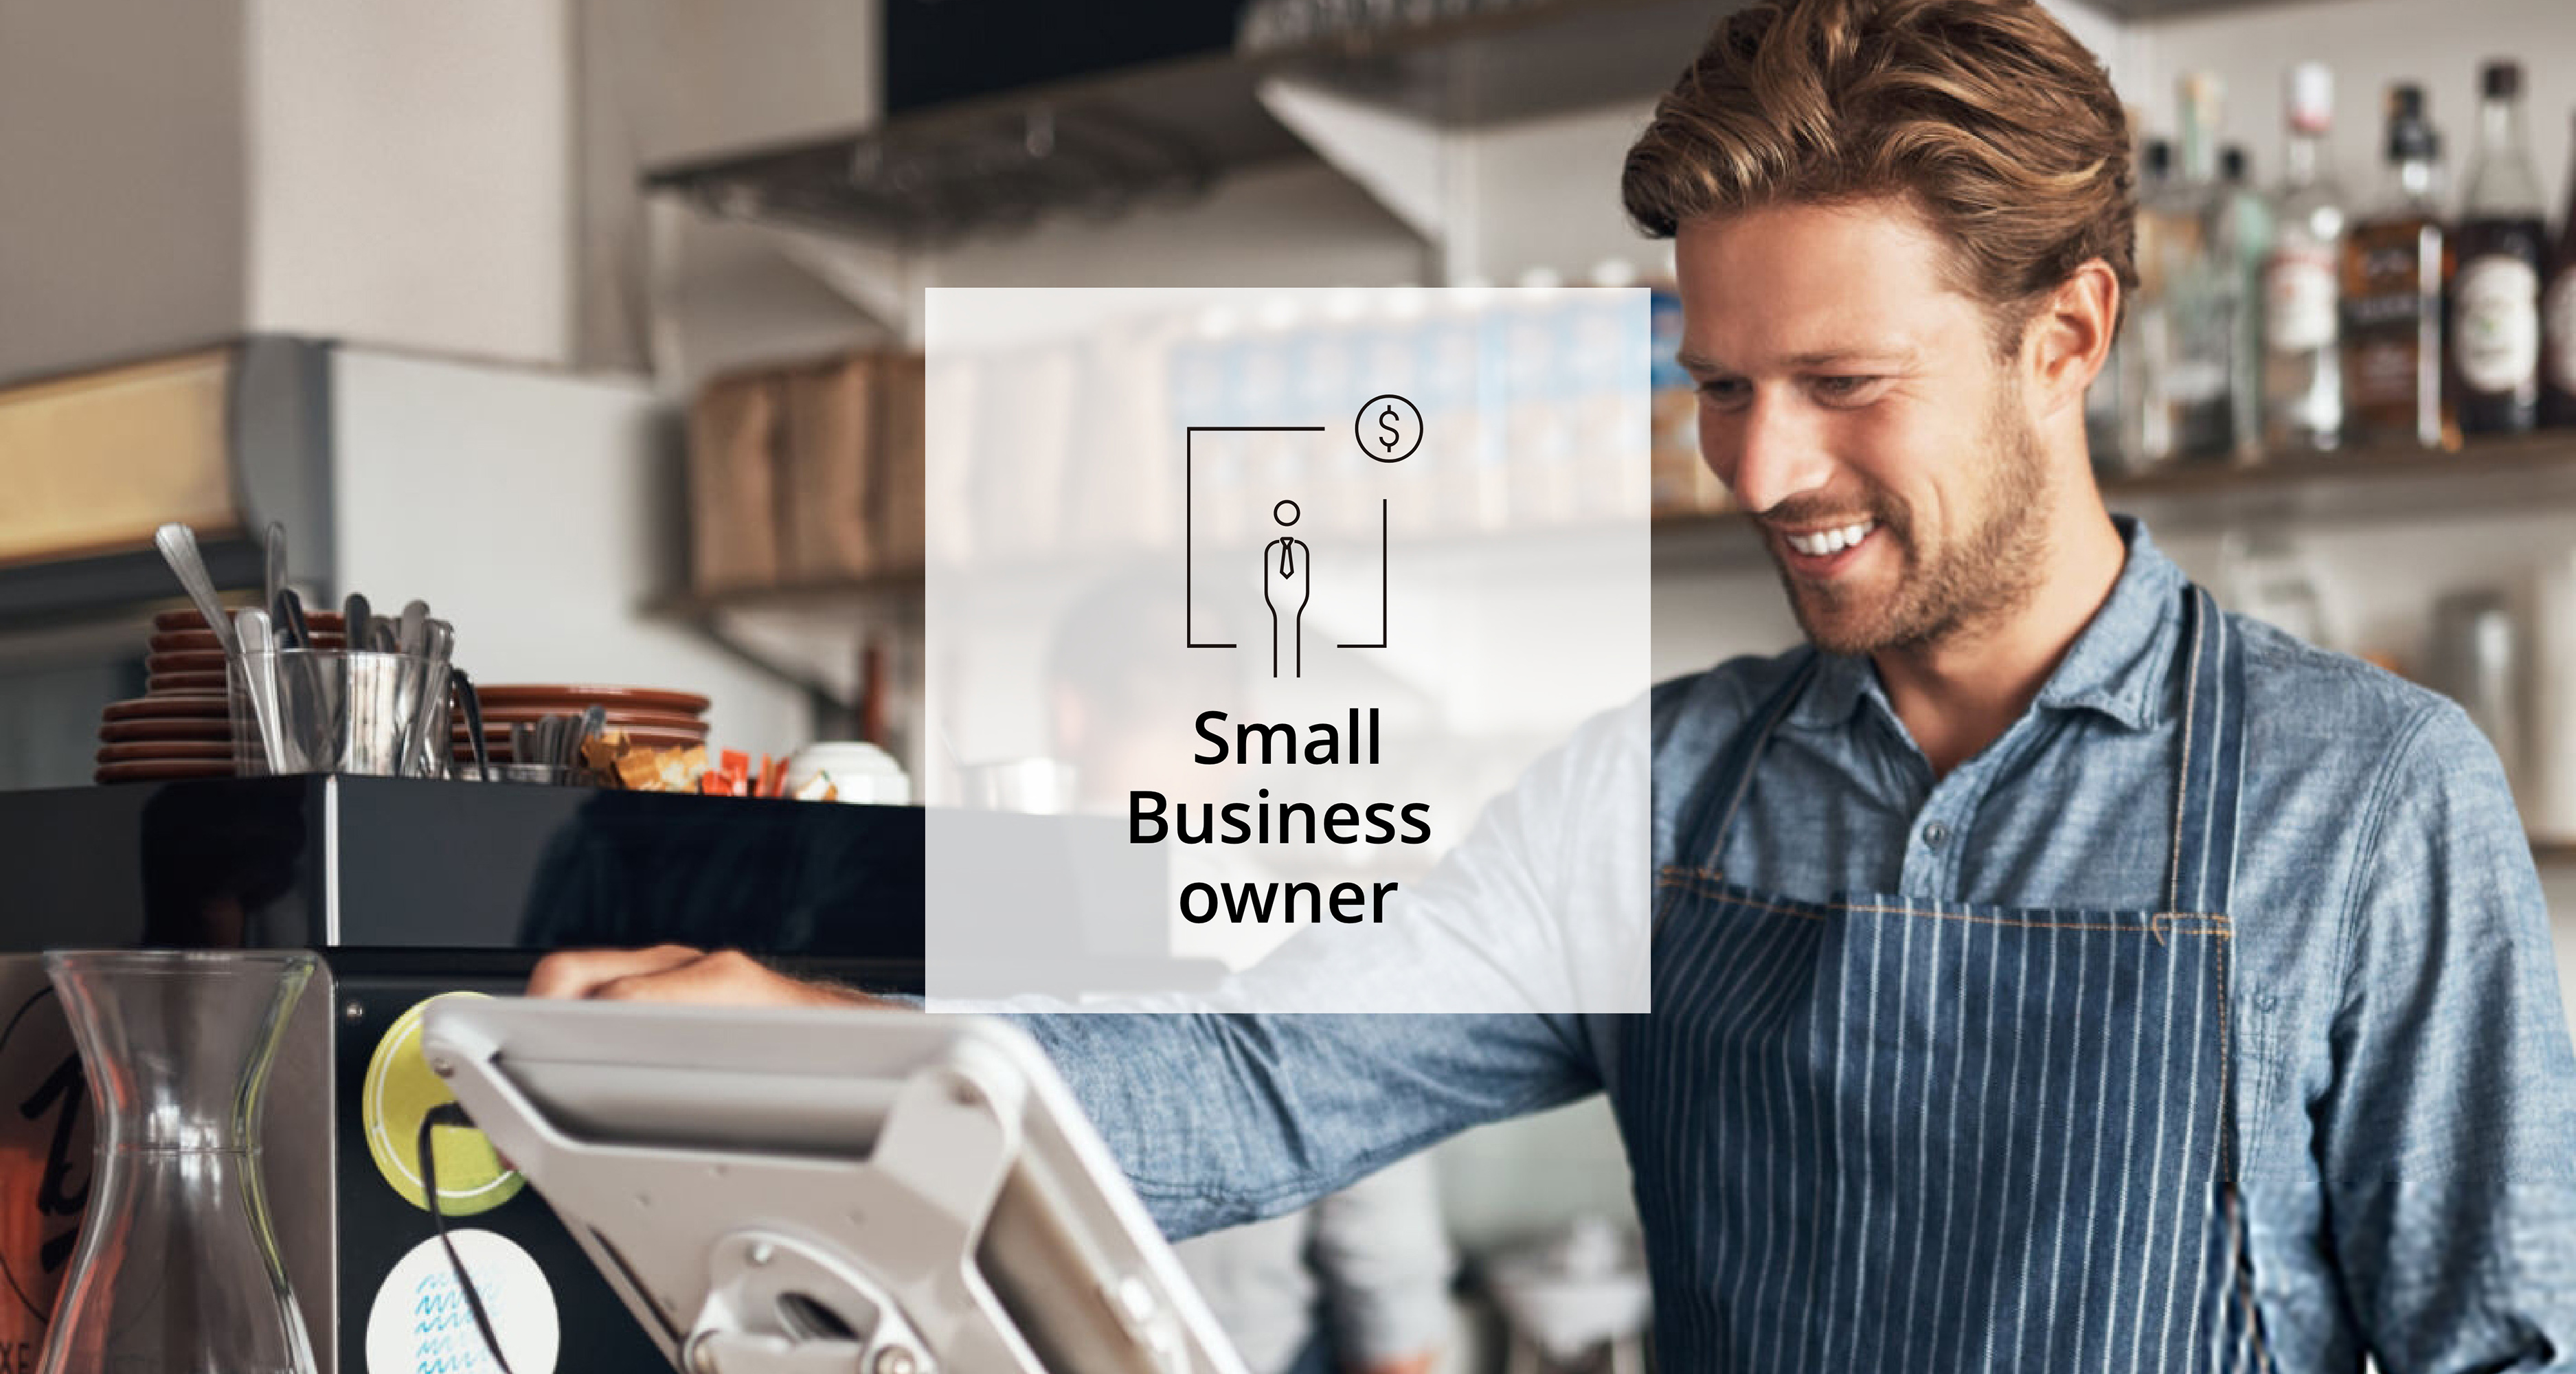 An image of a man using a cash register as a Business Owner